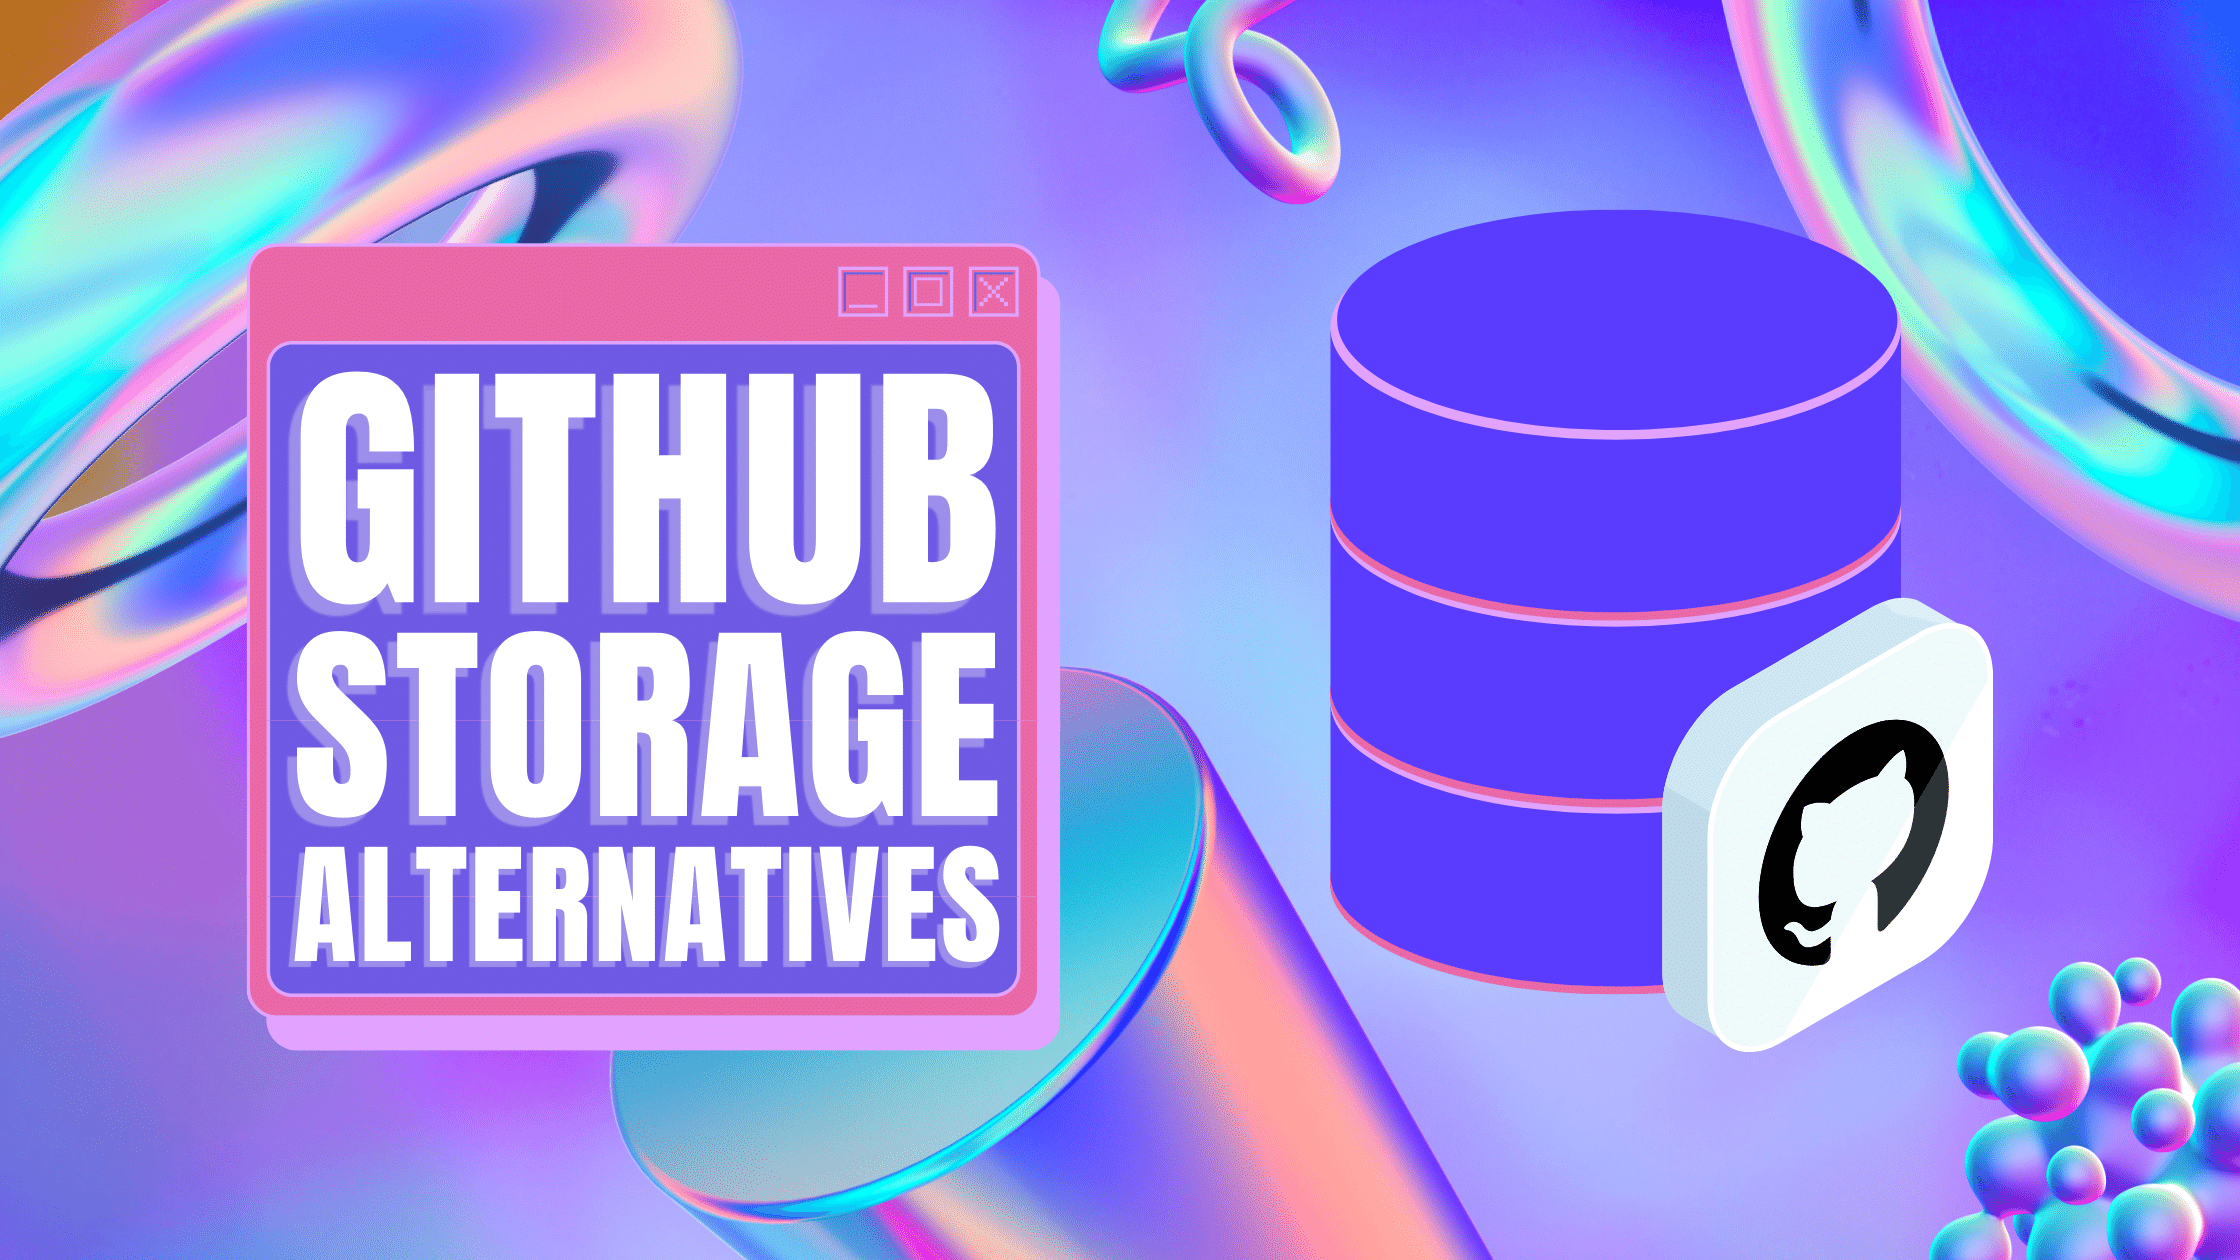 GitHub Storage Limits: What Are the Alternatives?